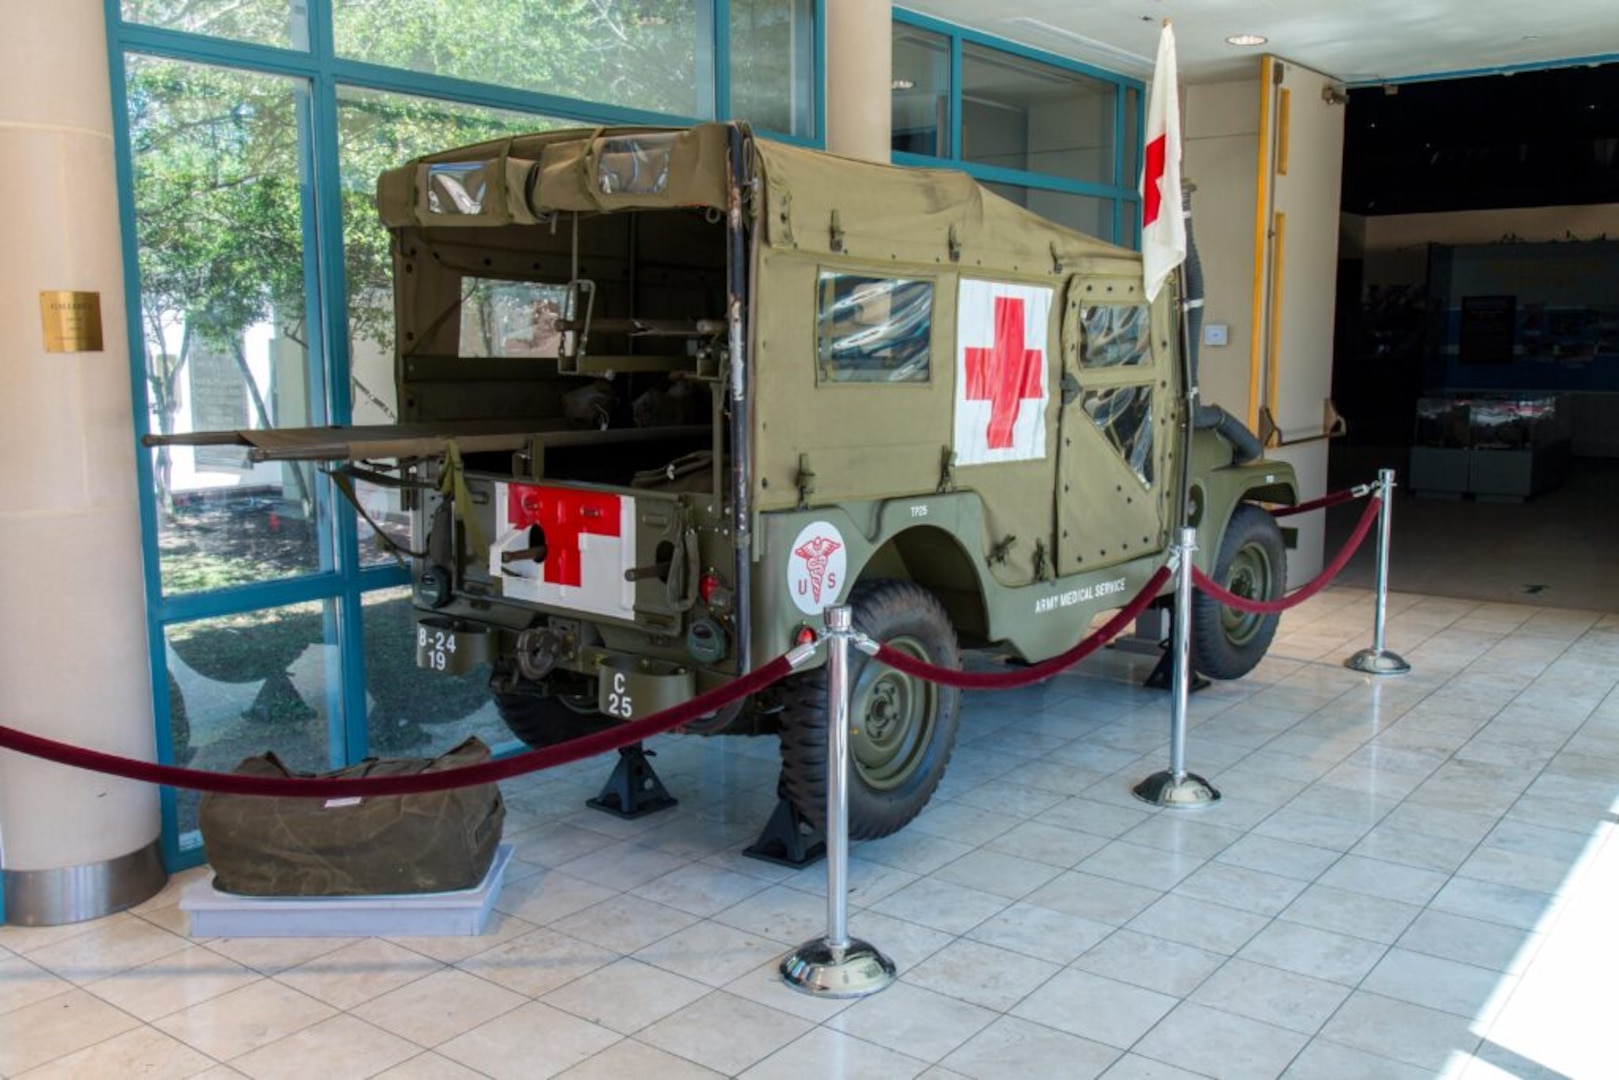 United States Army Medical Department Museum, or AMEDD Museum